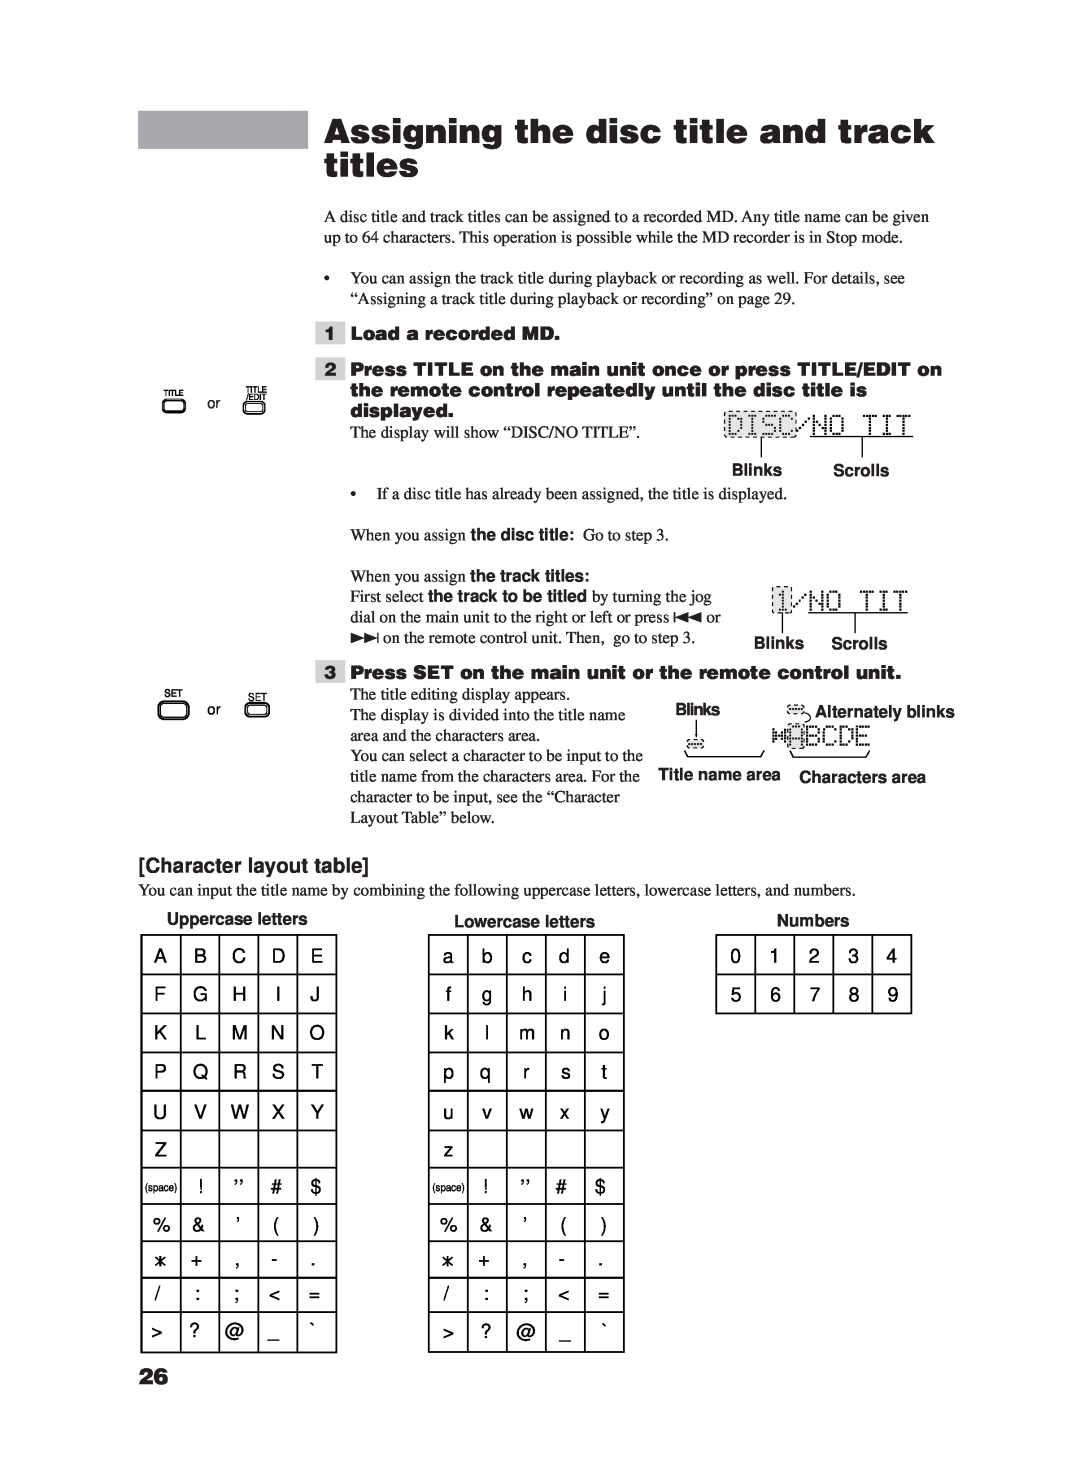 JVC XM-228BK manual Assigning the disc title and track titles, Character layout table 